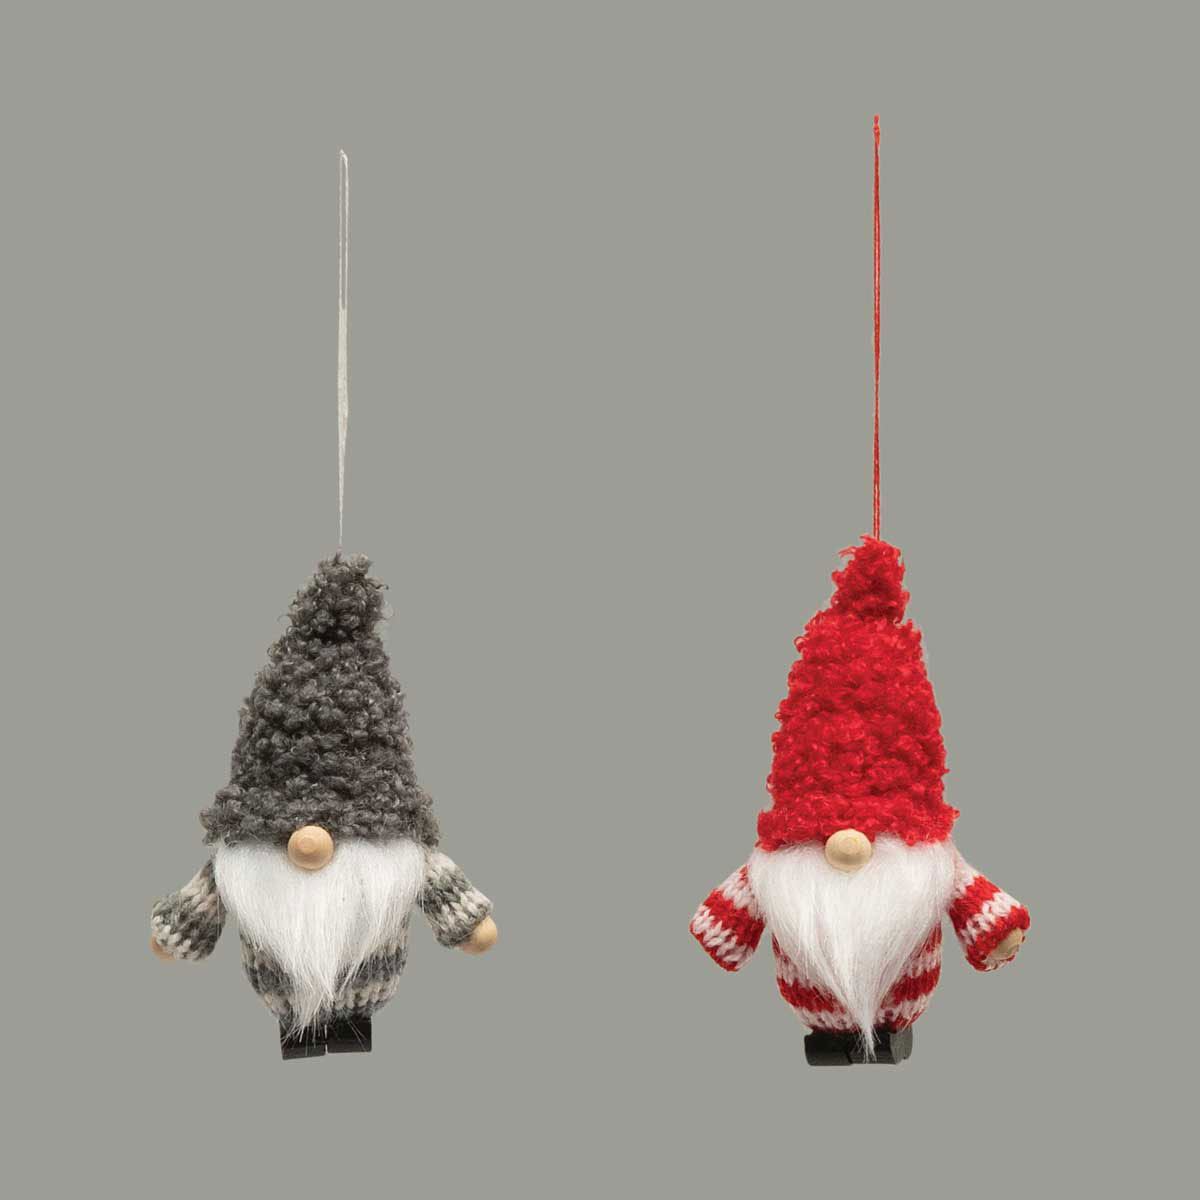 b50 ORNAMENT CHEER GNOME 2ASSORTED 2.5IN X 1.5IN X 3.5IN